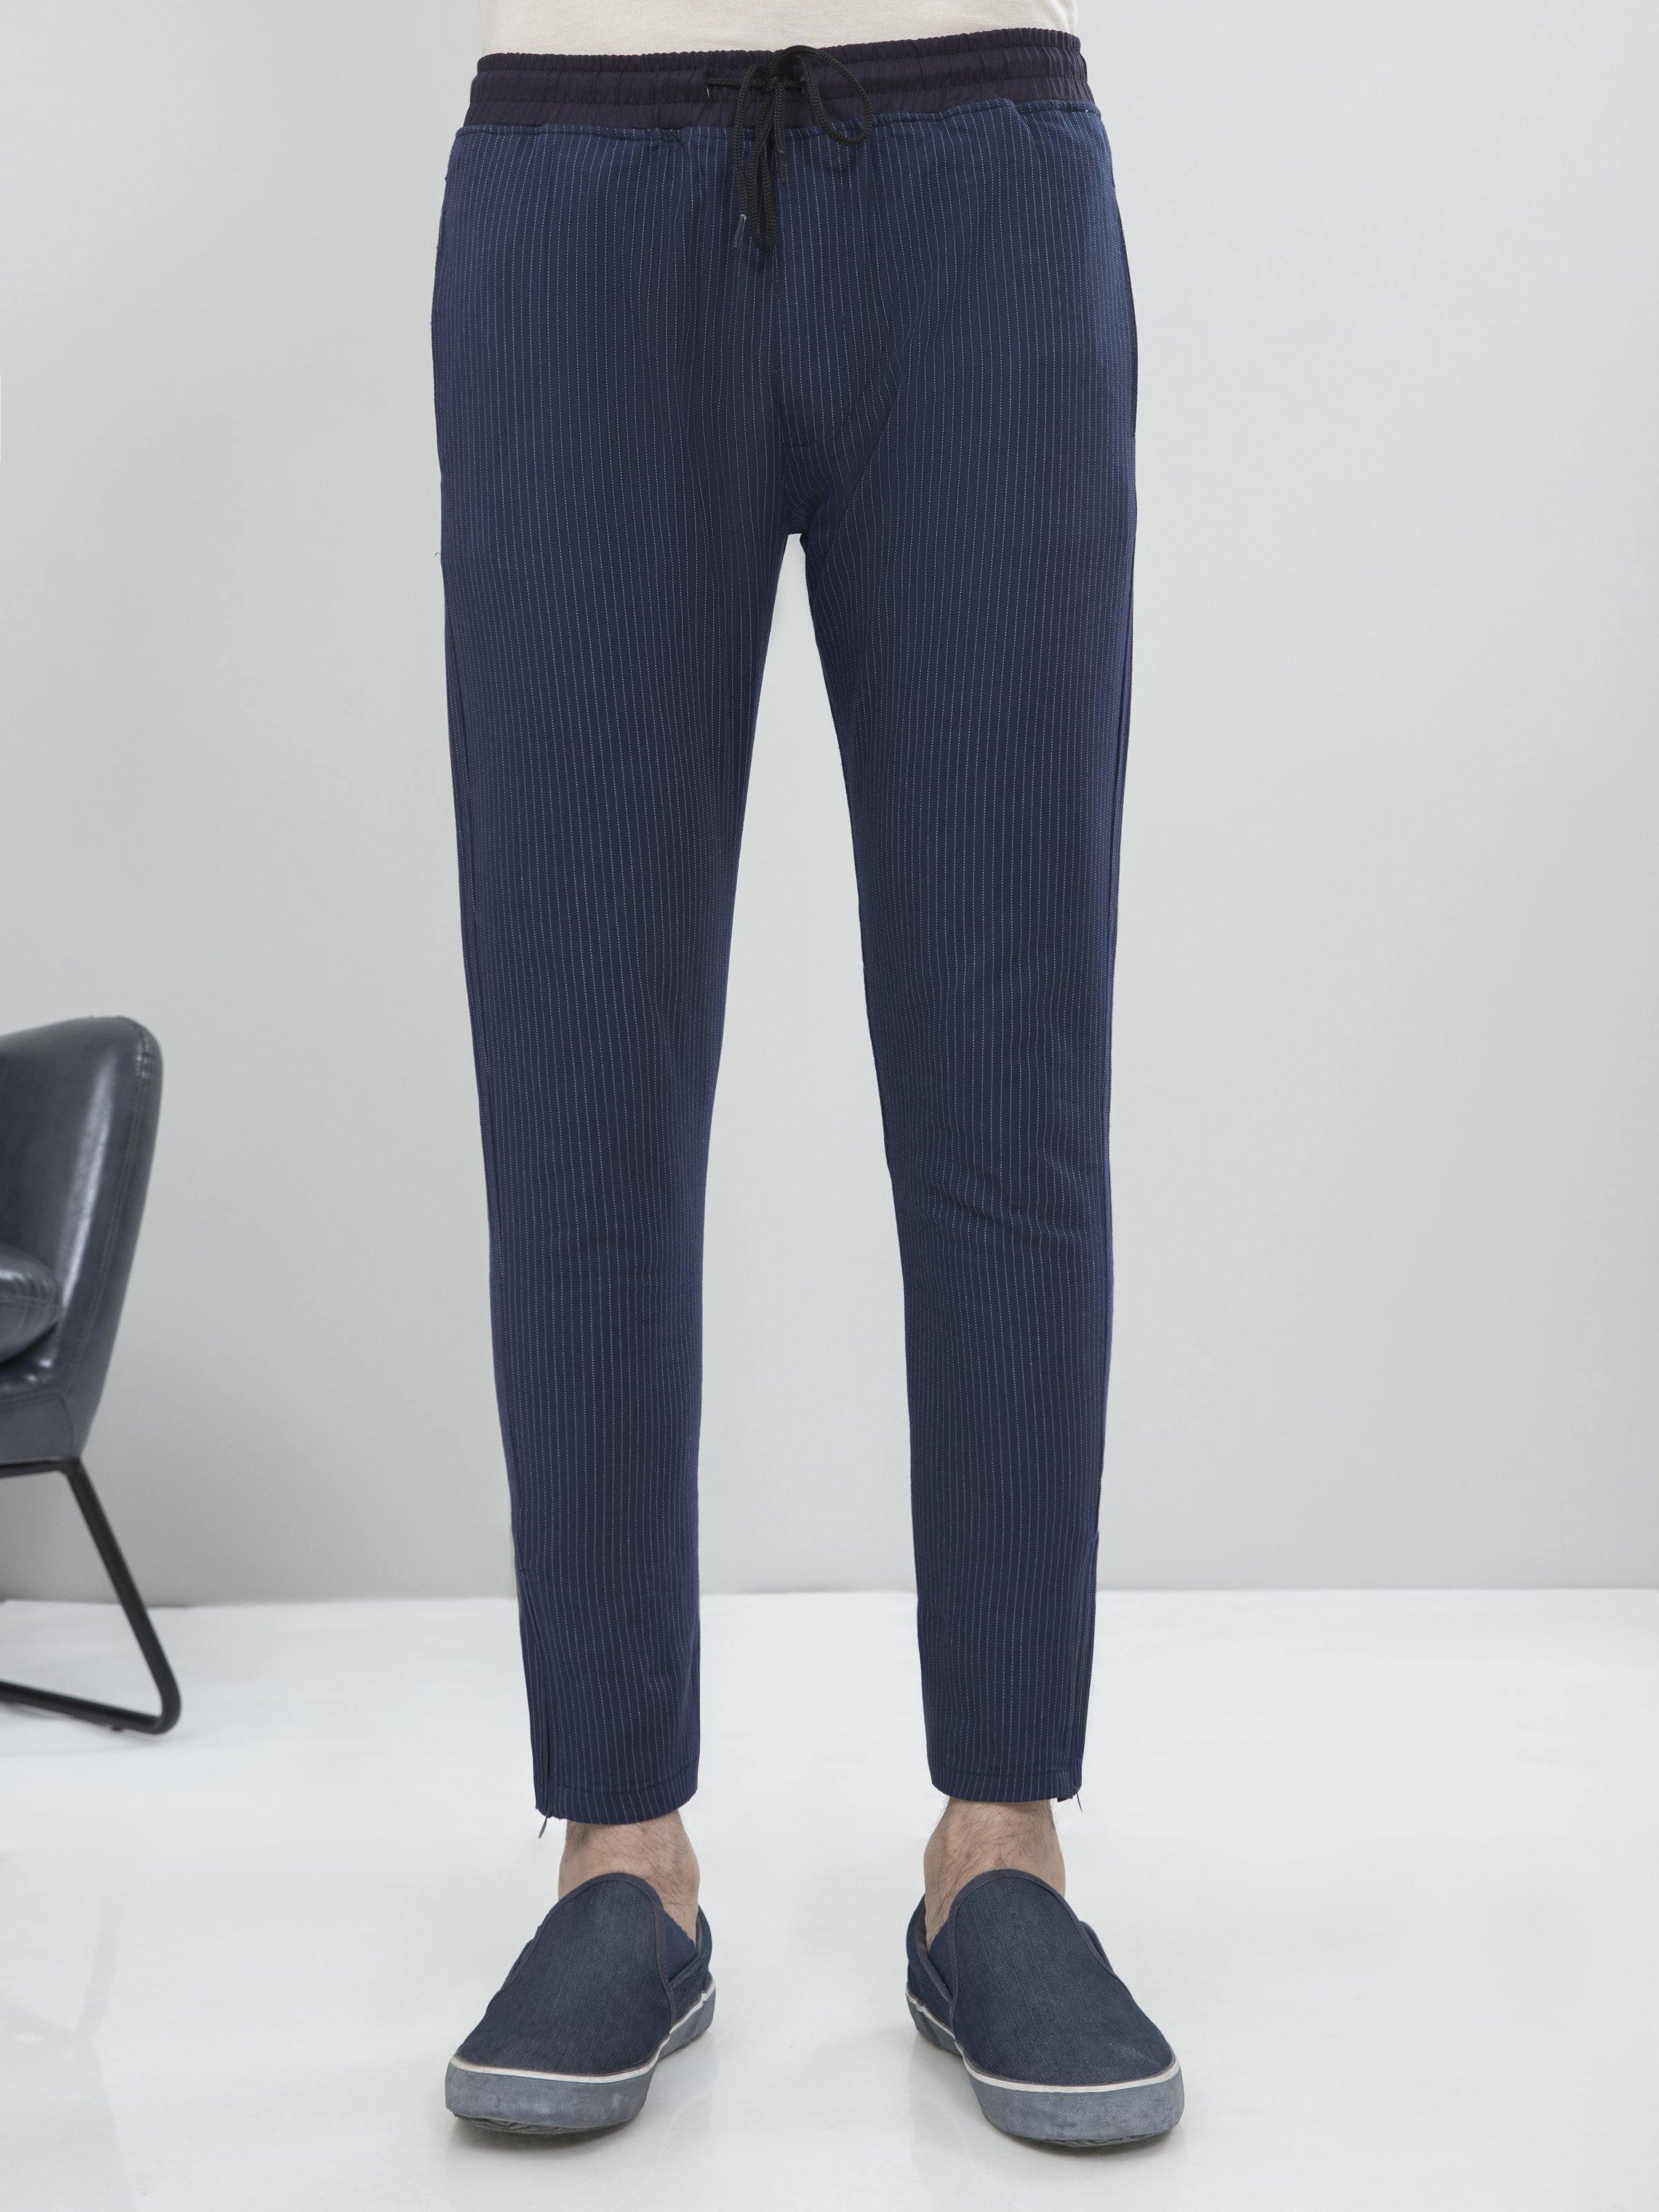 CASUAL TROUSER TAPERED FIT NAVY BLUE at Charcoal Clothing